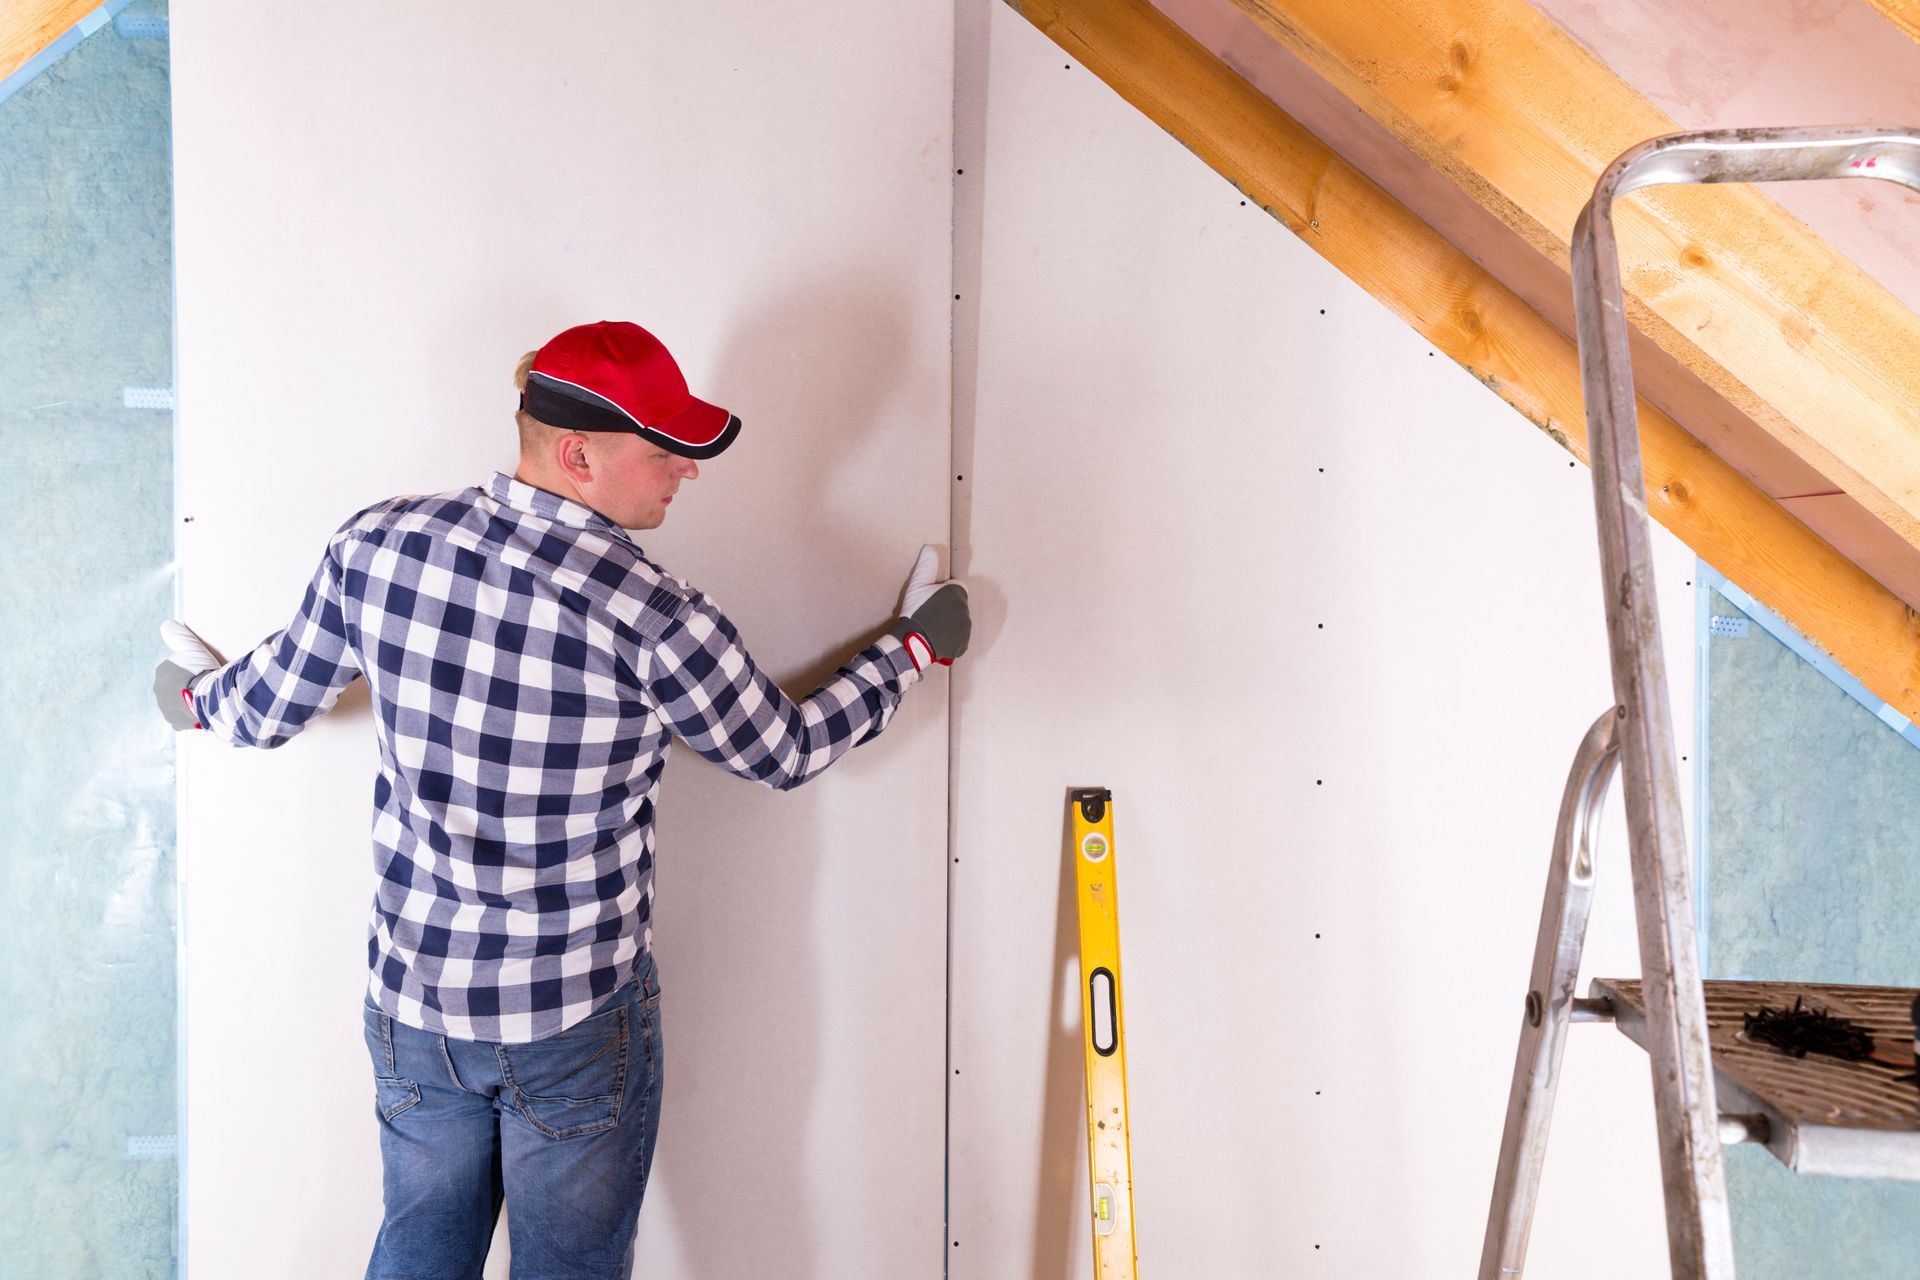 An experienced handyman skillfully installs and finishes drywall panels in a commercial setting, ensuring a smooth and seamless surface.